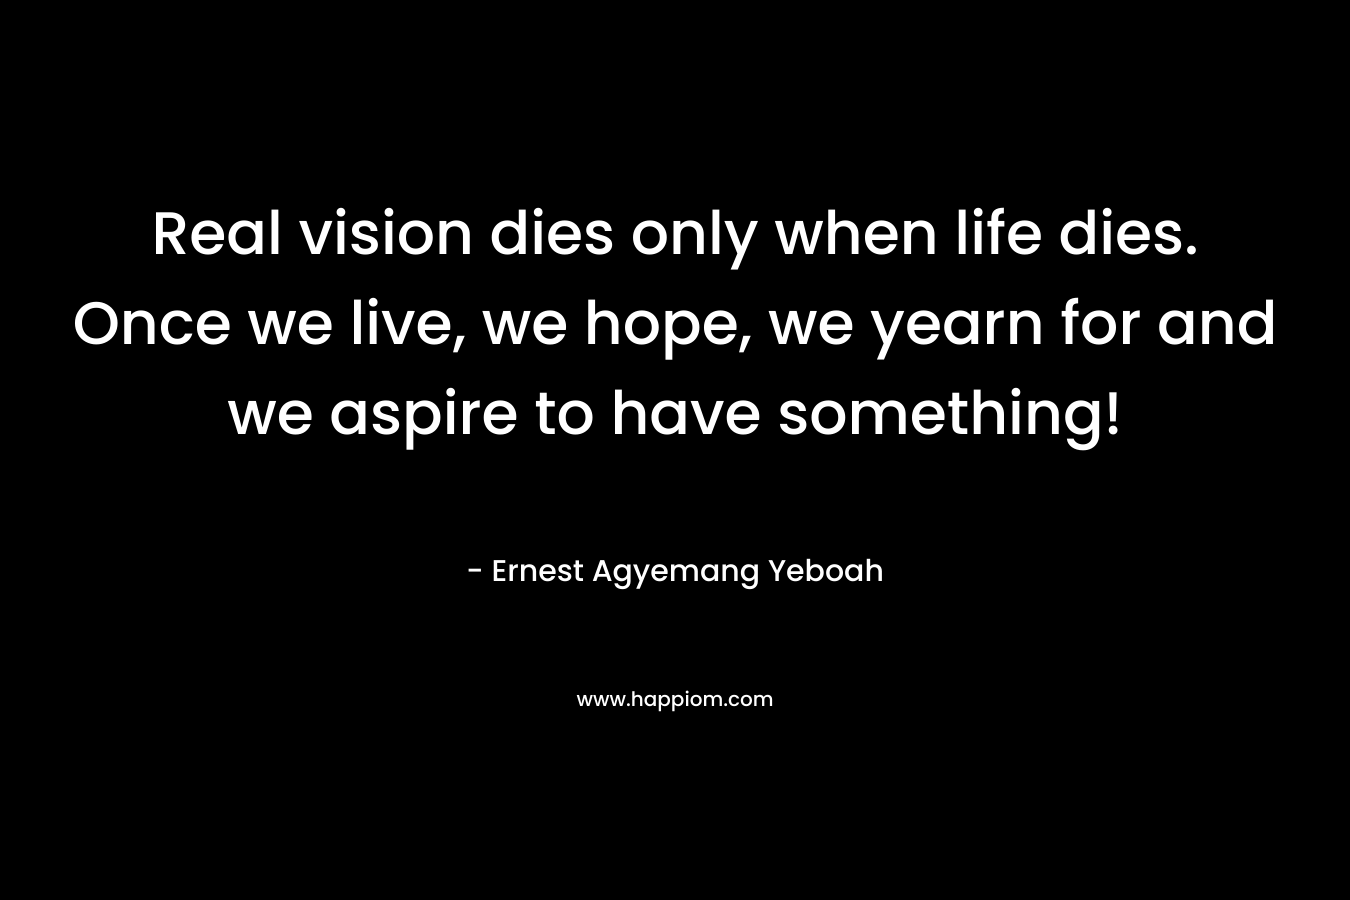 Real vision dies only when life dies. Once we live, we hope, we yearn for and we aspire to have something!